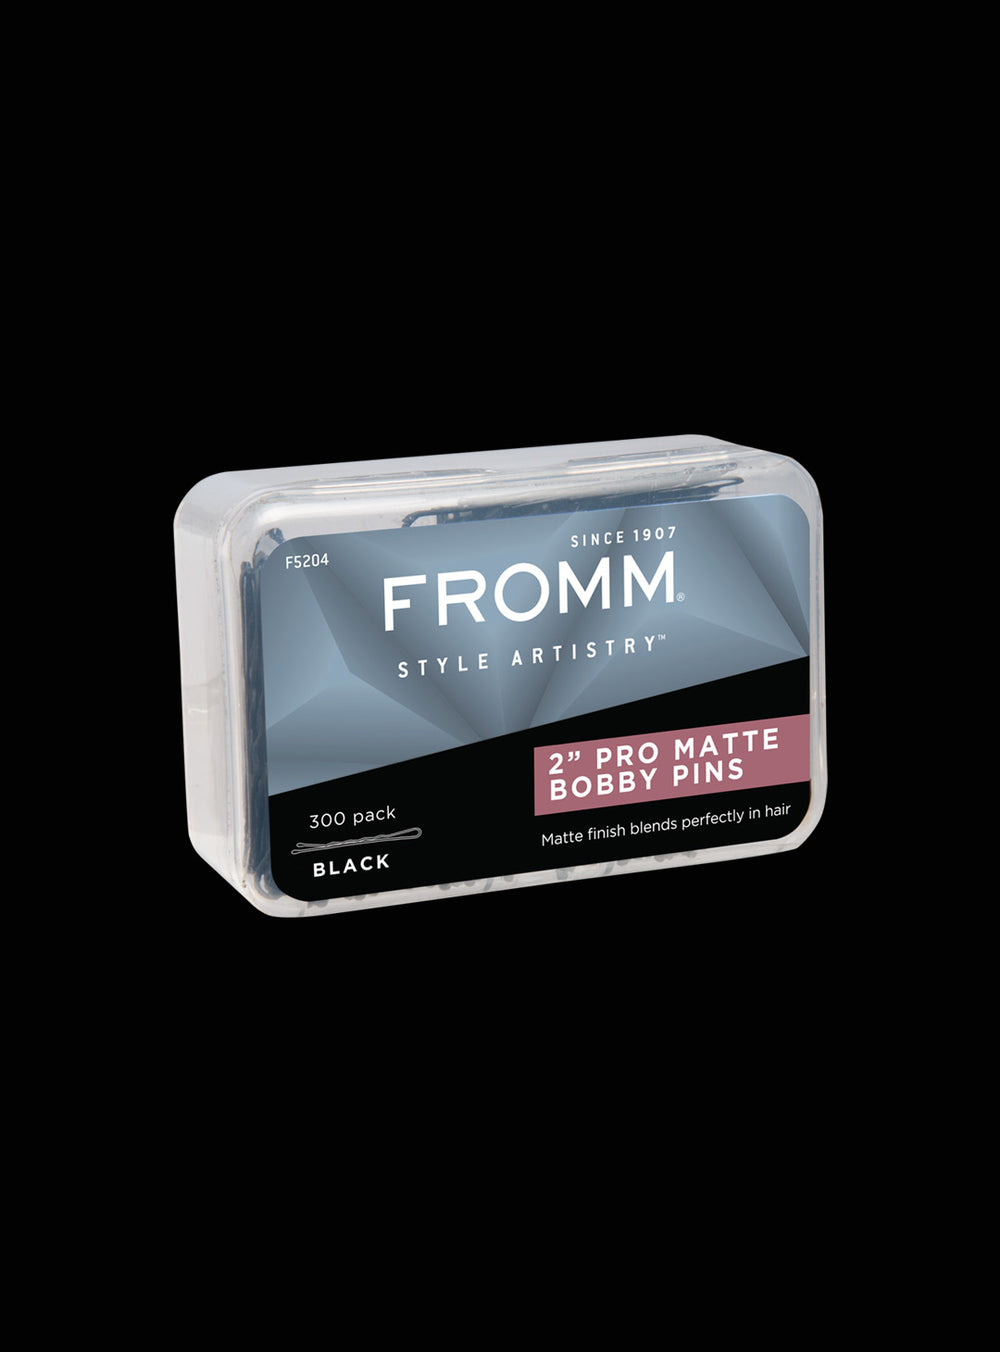 Diane by Fromm 2 Pro Matte Brown Bobby Pins - 300 Pack